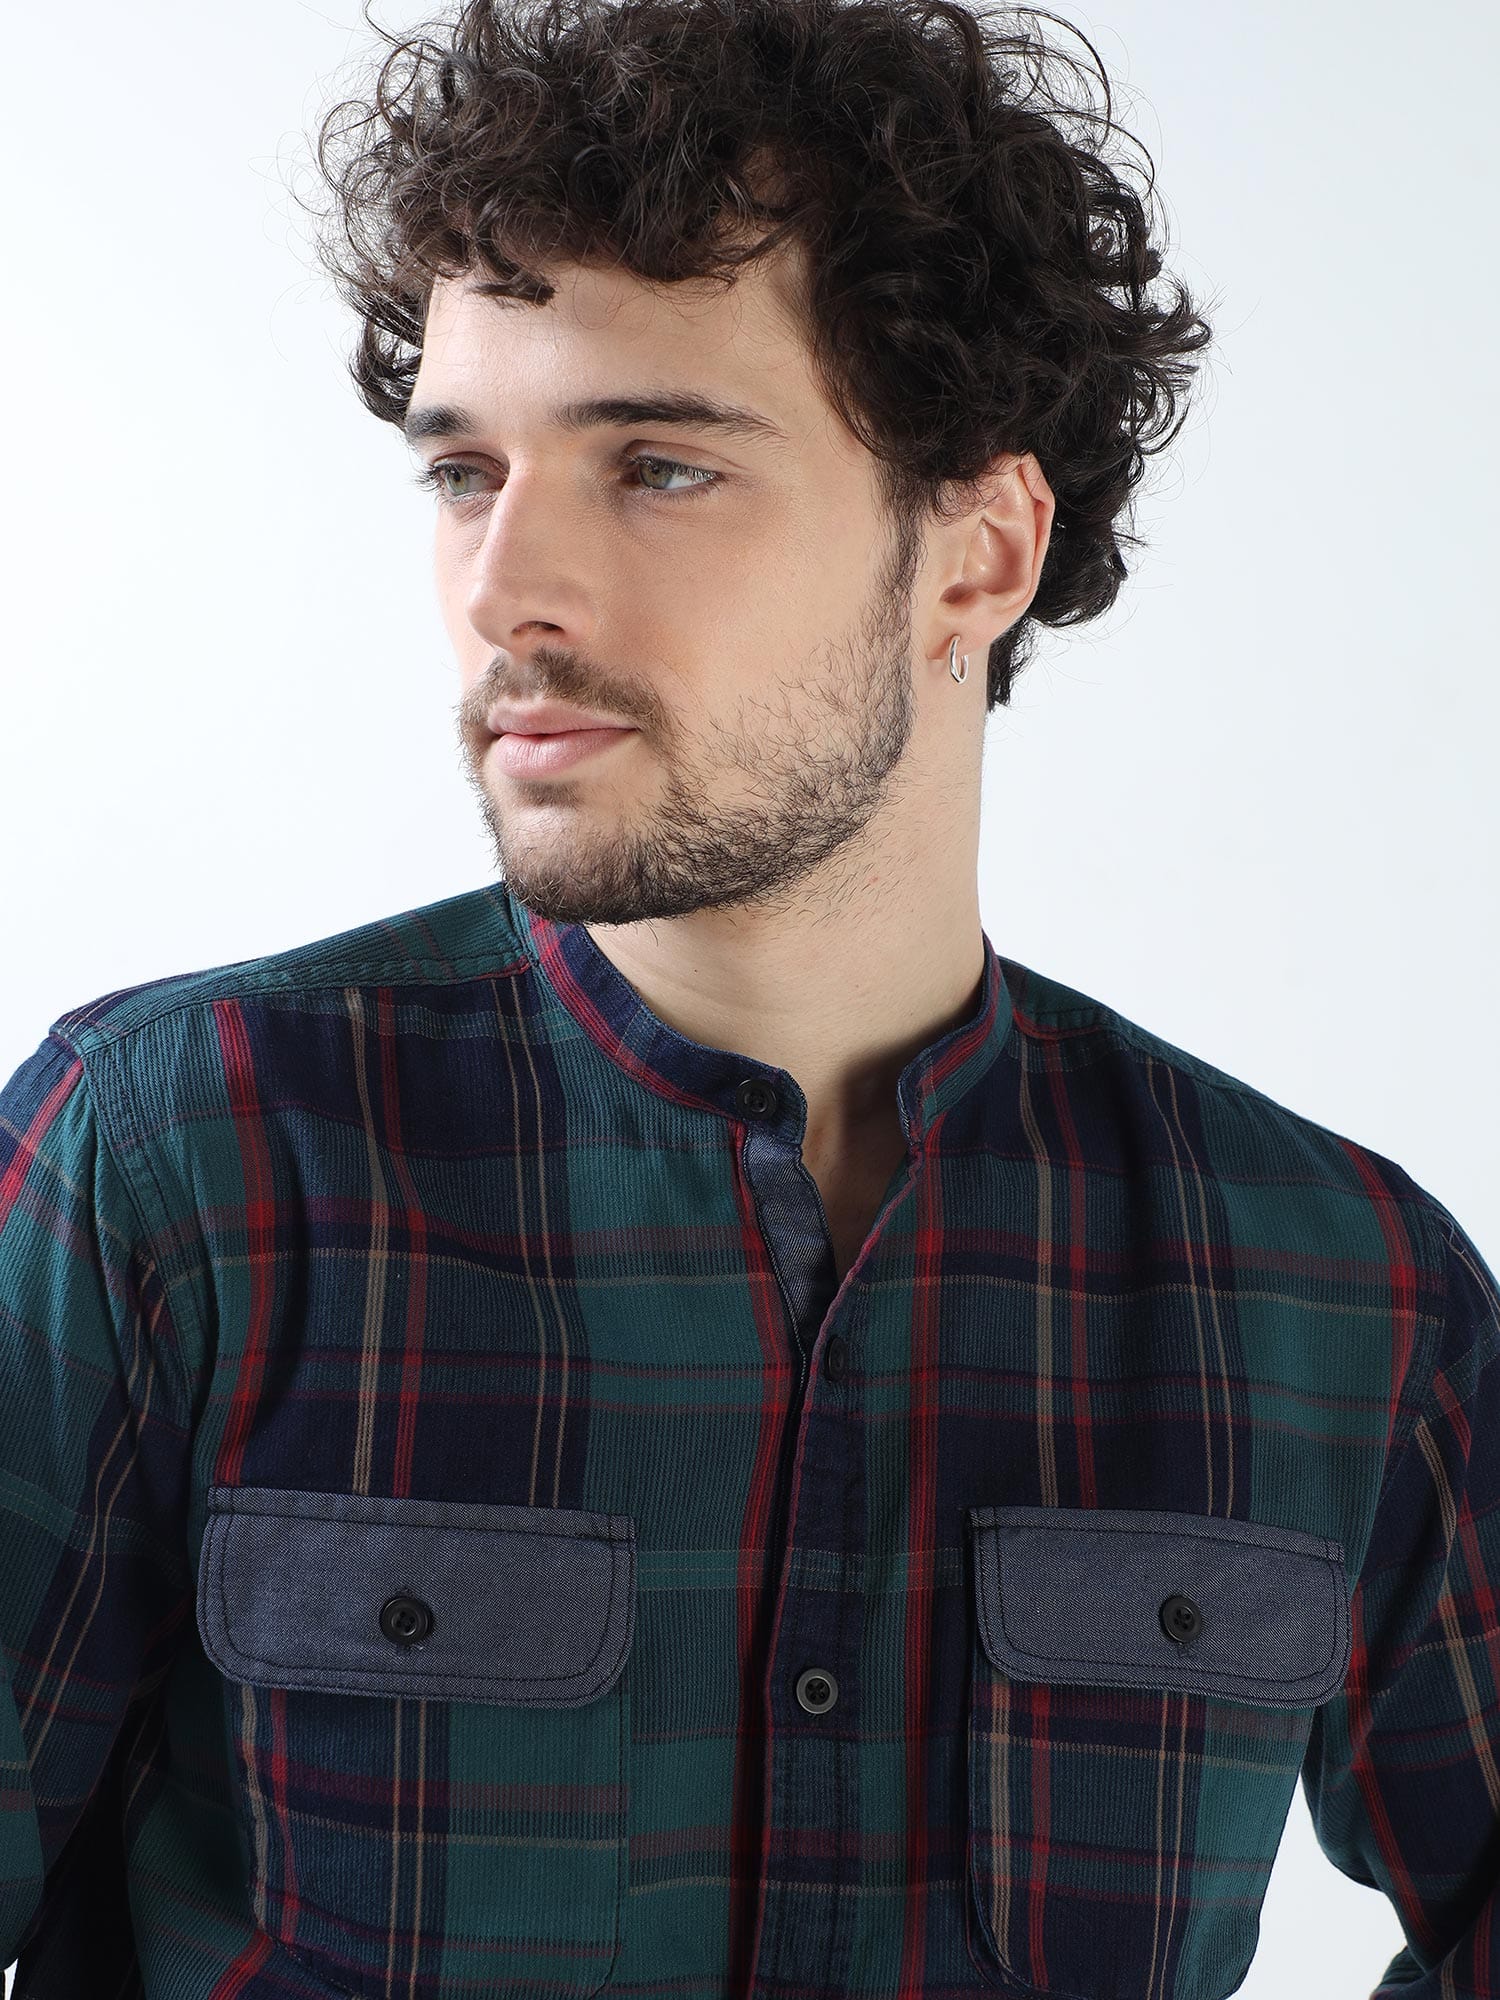 Emerald Green and Navy Blue Double Cargo Pocket Shirt for Men 